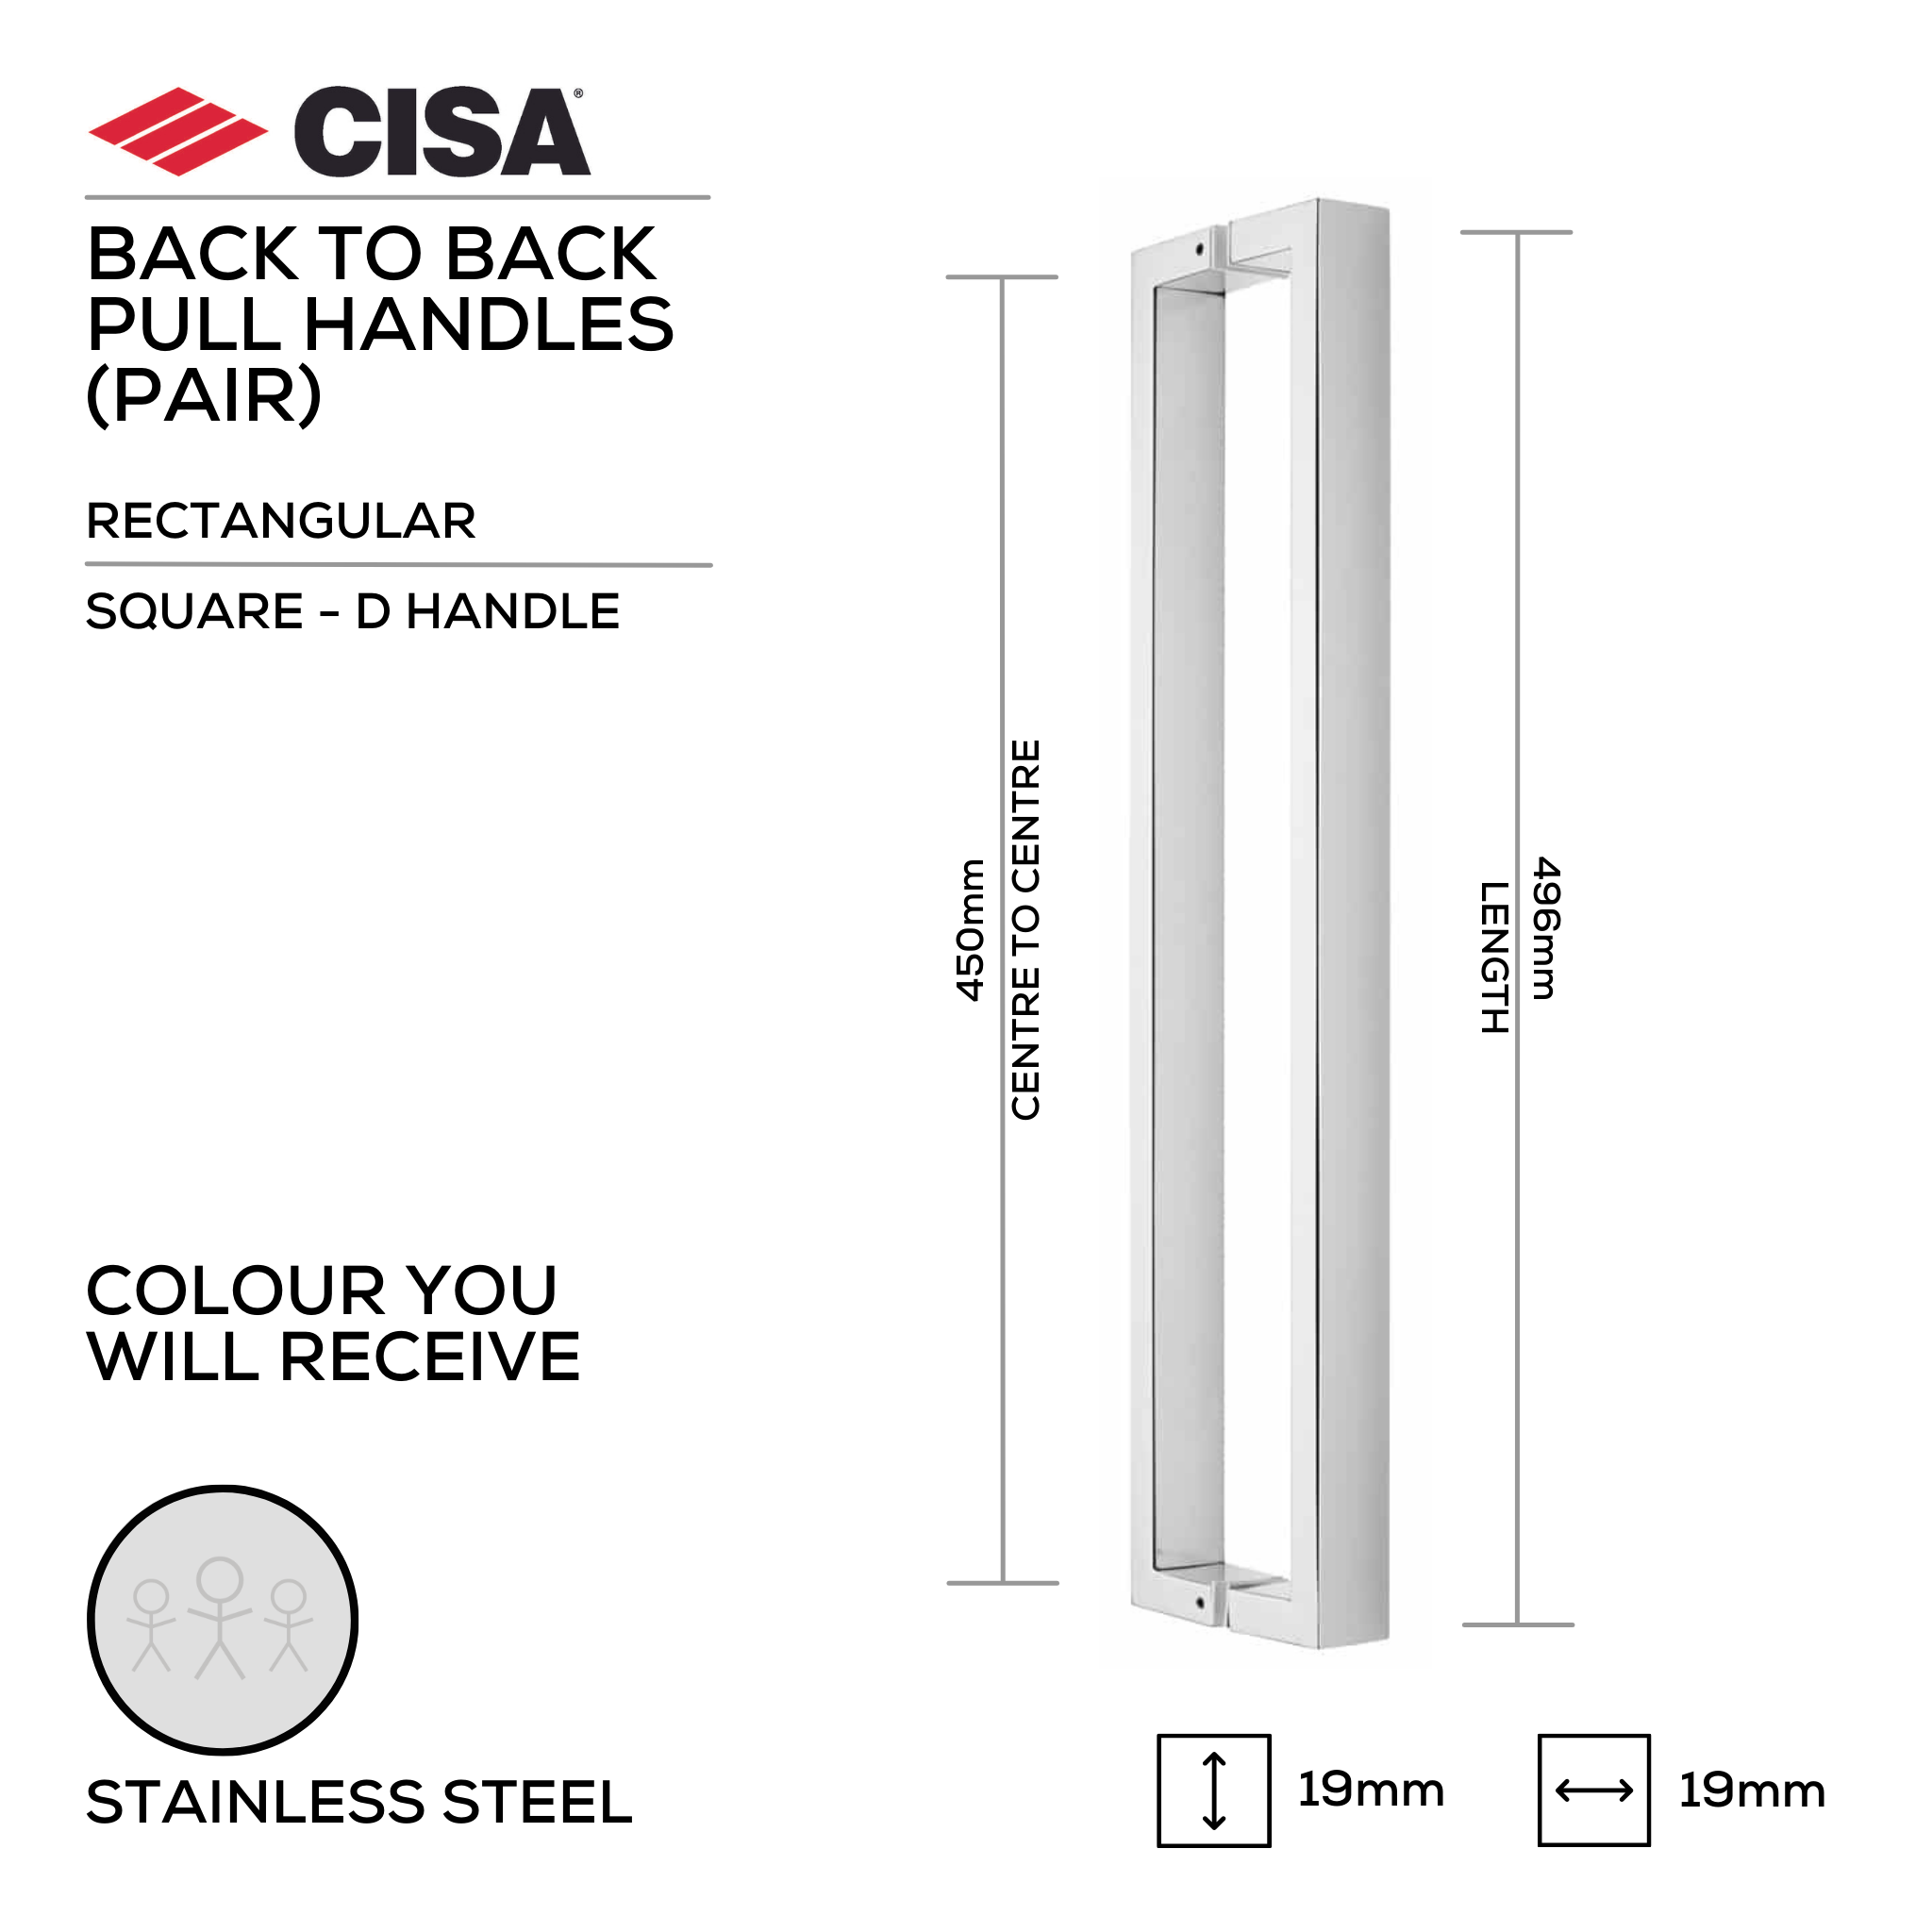 FP.SD03.BB.SS, Pull Handle, Square, D Handle, BTB, 19mm (d) x 469mm (l) x 450mm (ctc), Stainless Steel, CISA